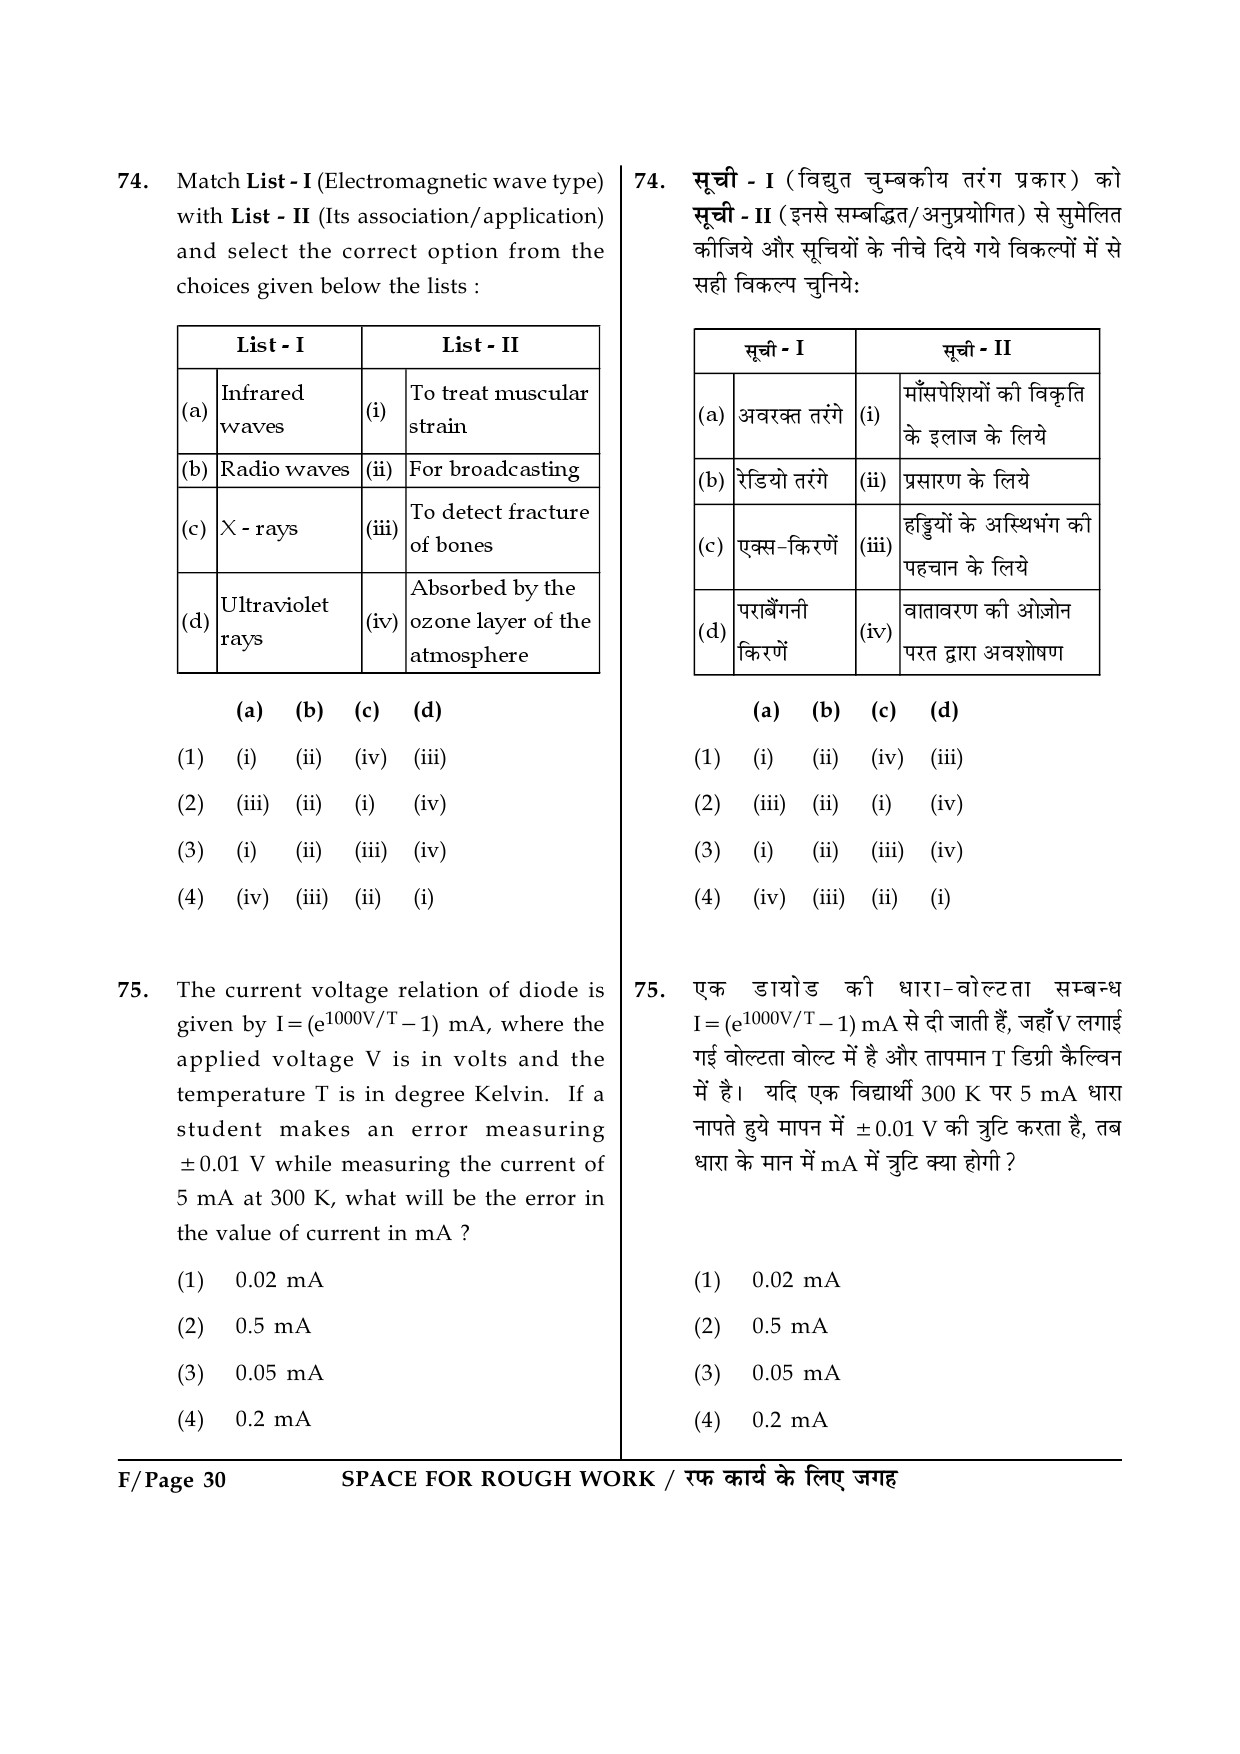 JEE Main Exam Question Paper 2014 Booklet F 30